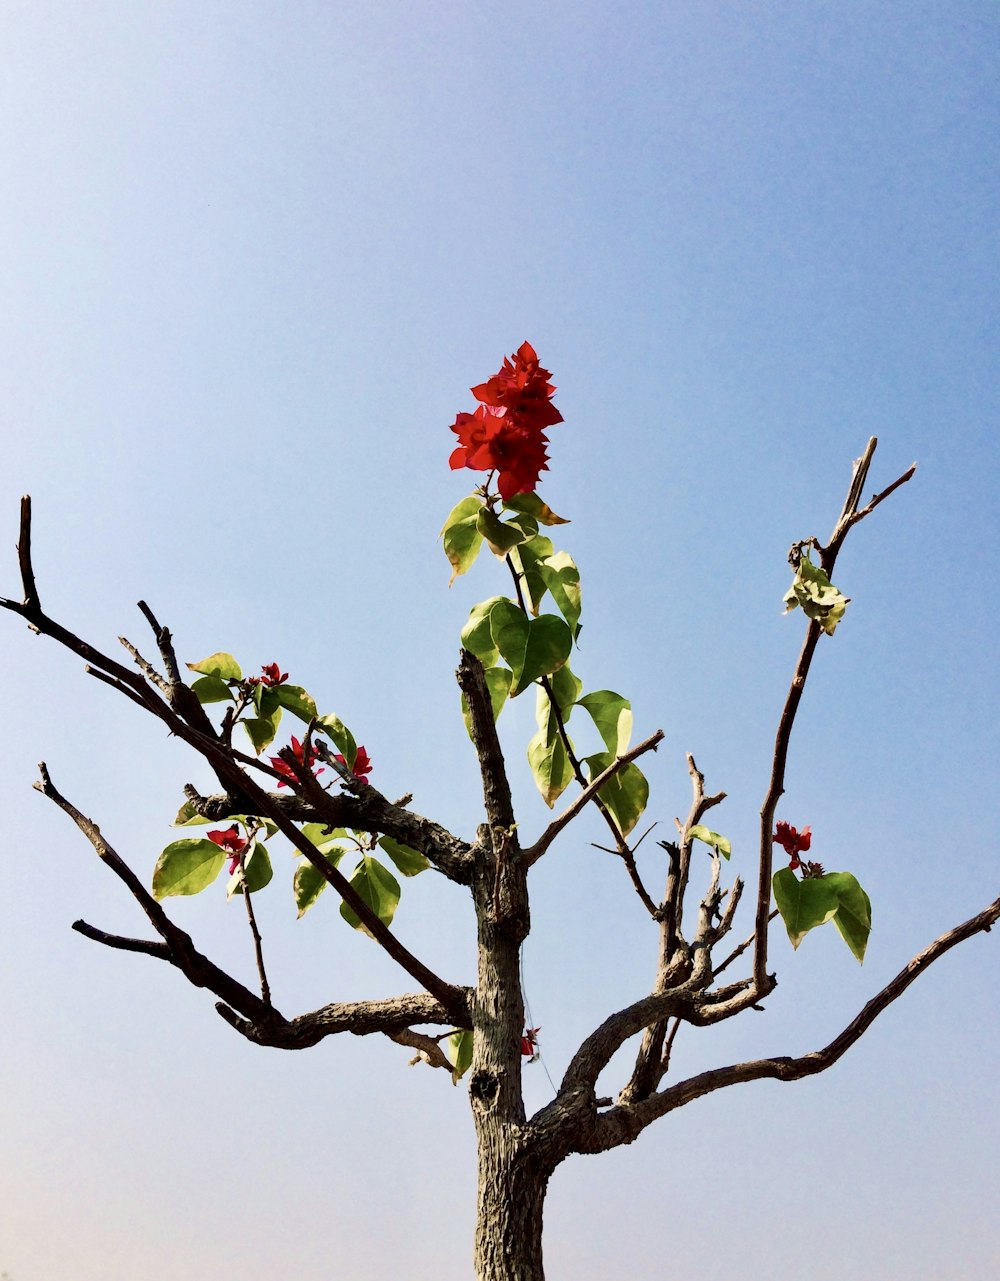 a tree with red flowers in the middle of a field